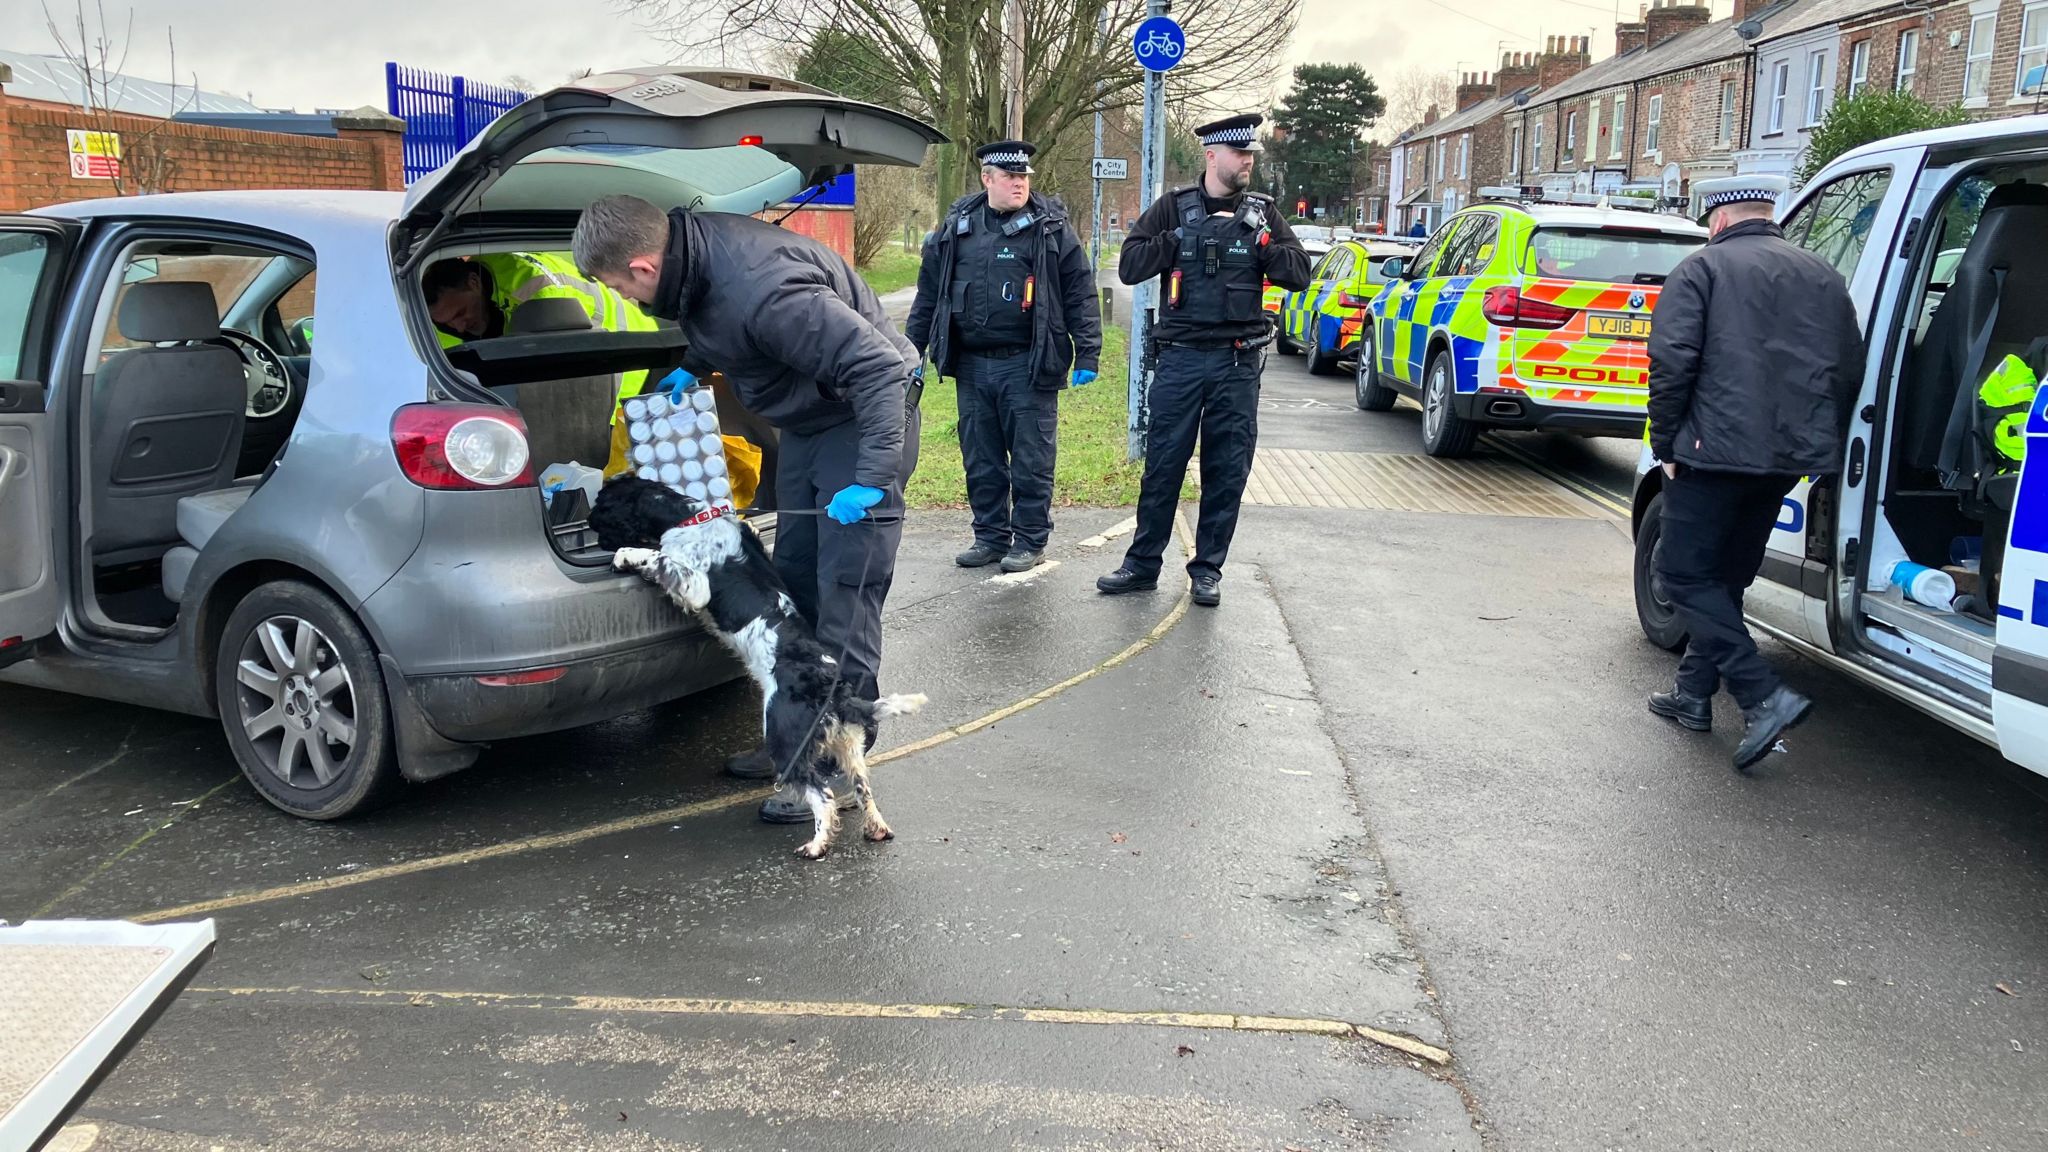 Police carry out operations against organised criminal gangs in York